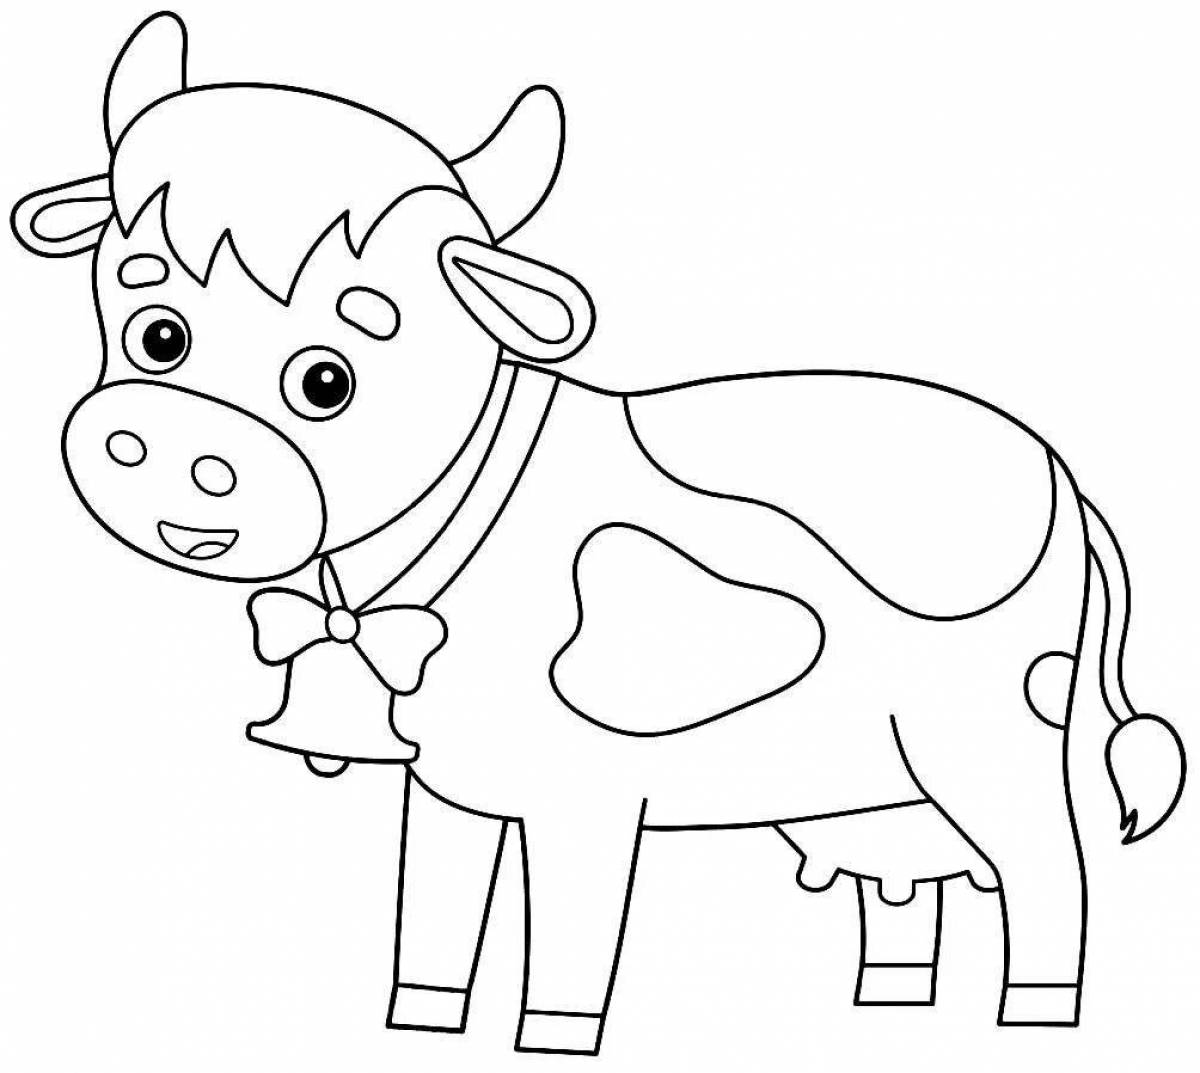 Adorable cow drawing for kids